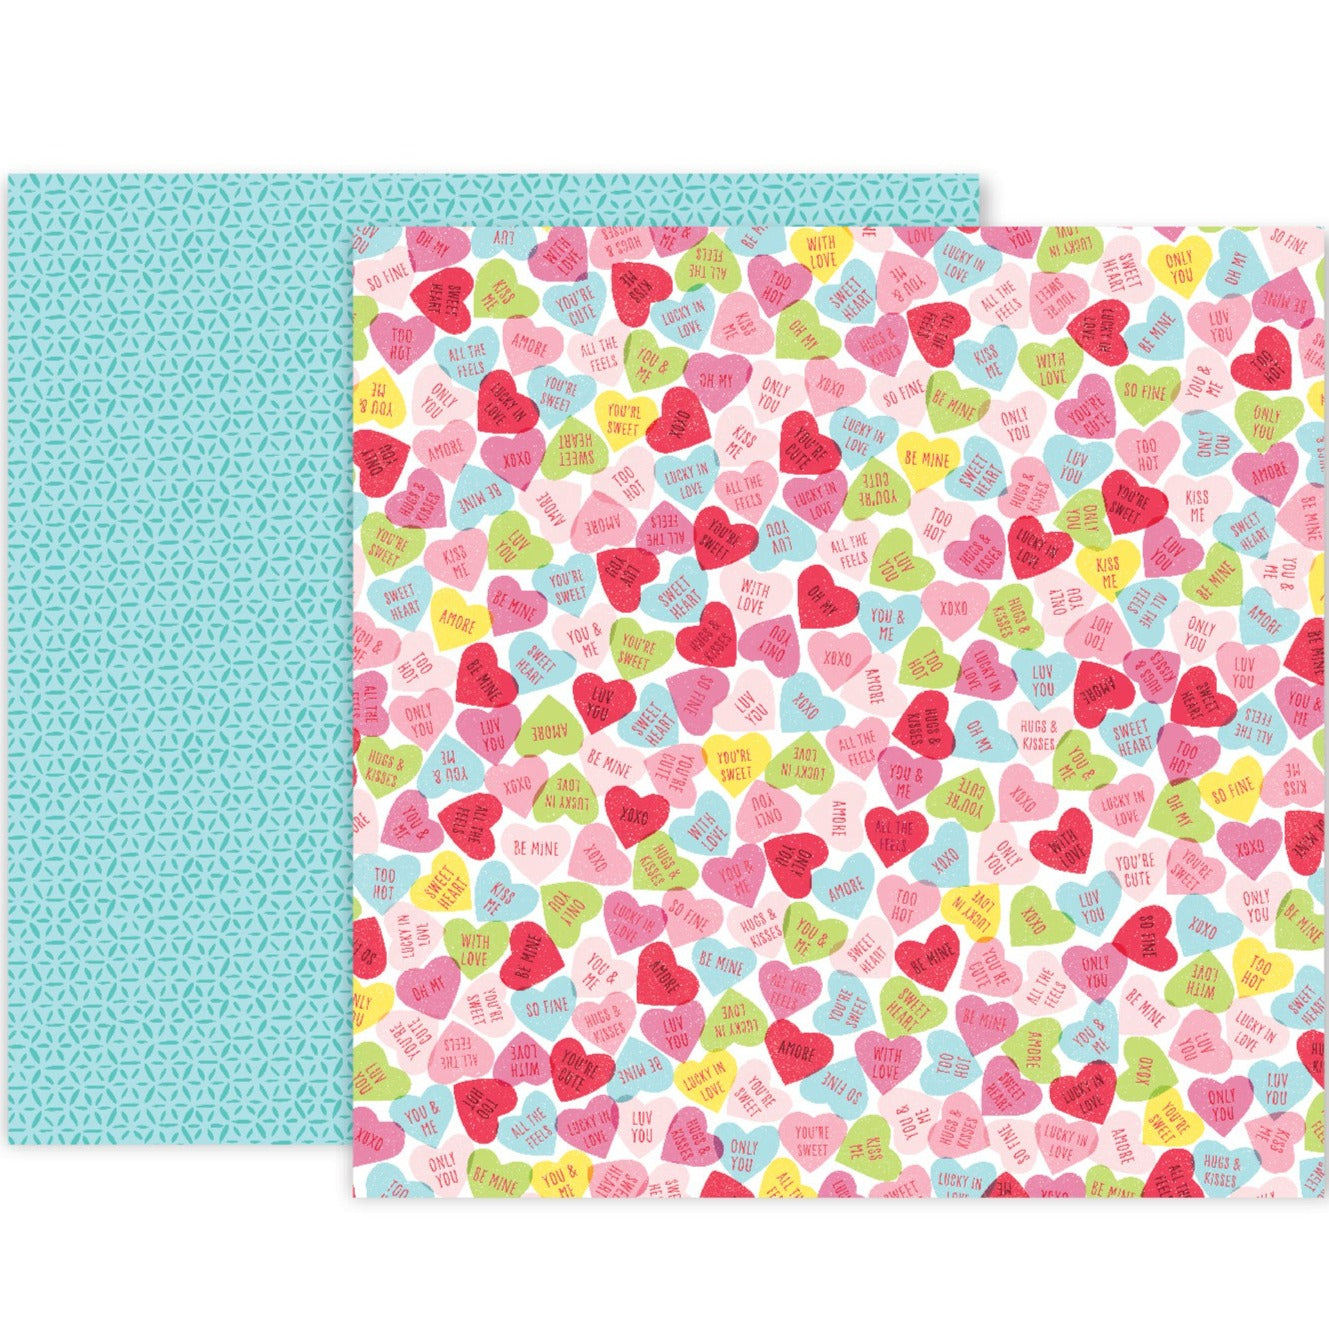 Multi-Colored (Side A - playful valentine conversation hearts in lovely reds and pinks with vibrant pops of other rainbow colors on a white background, Side B - turquoise pattern on a teal blue background)